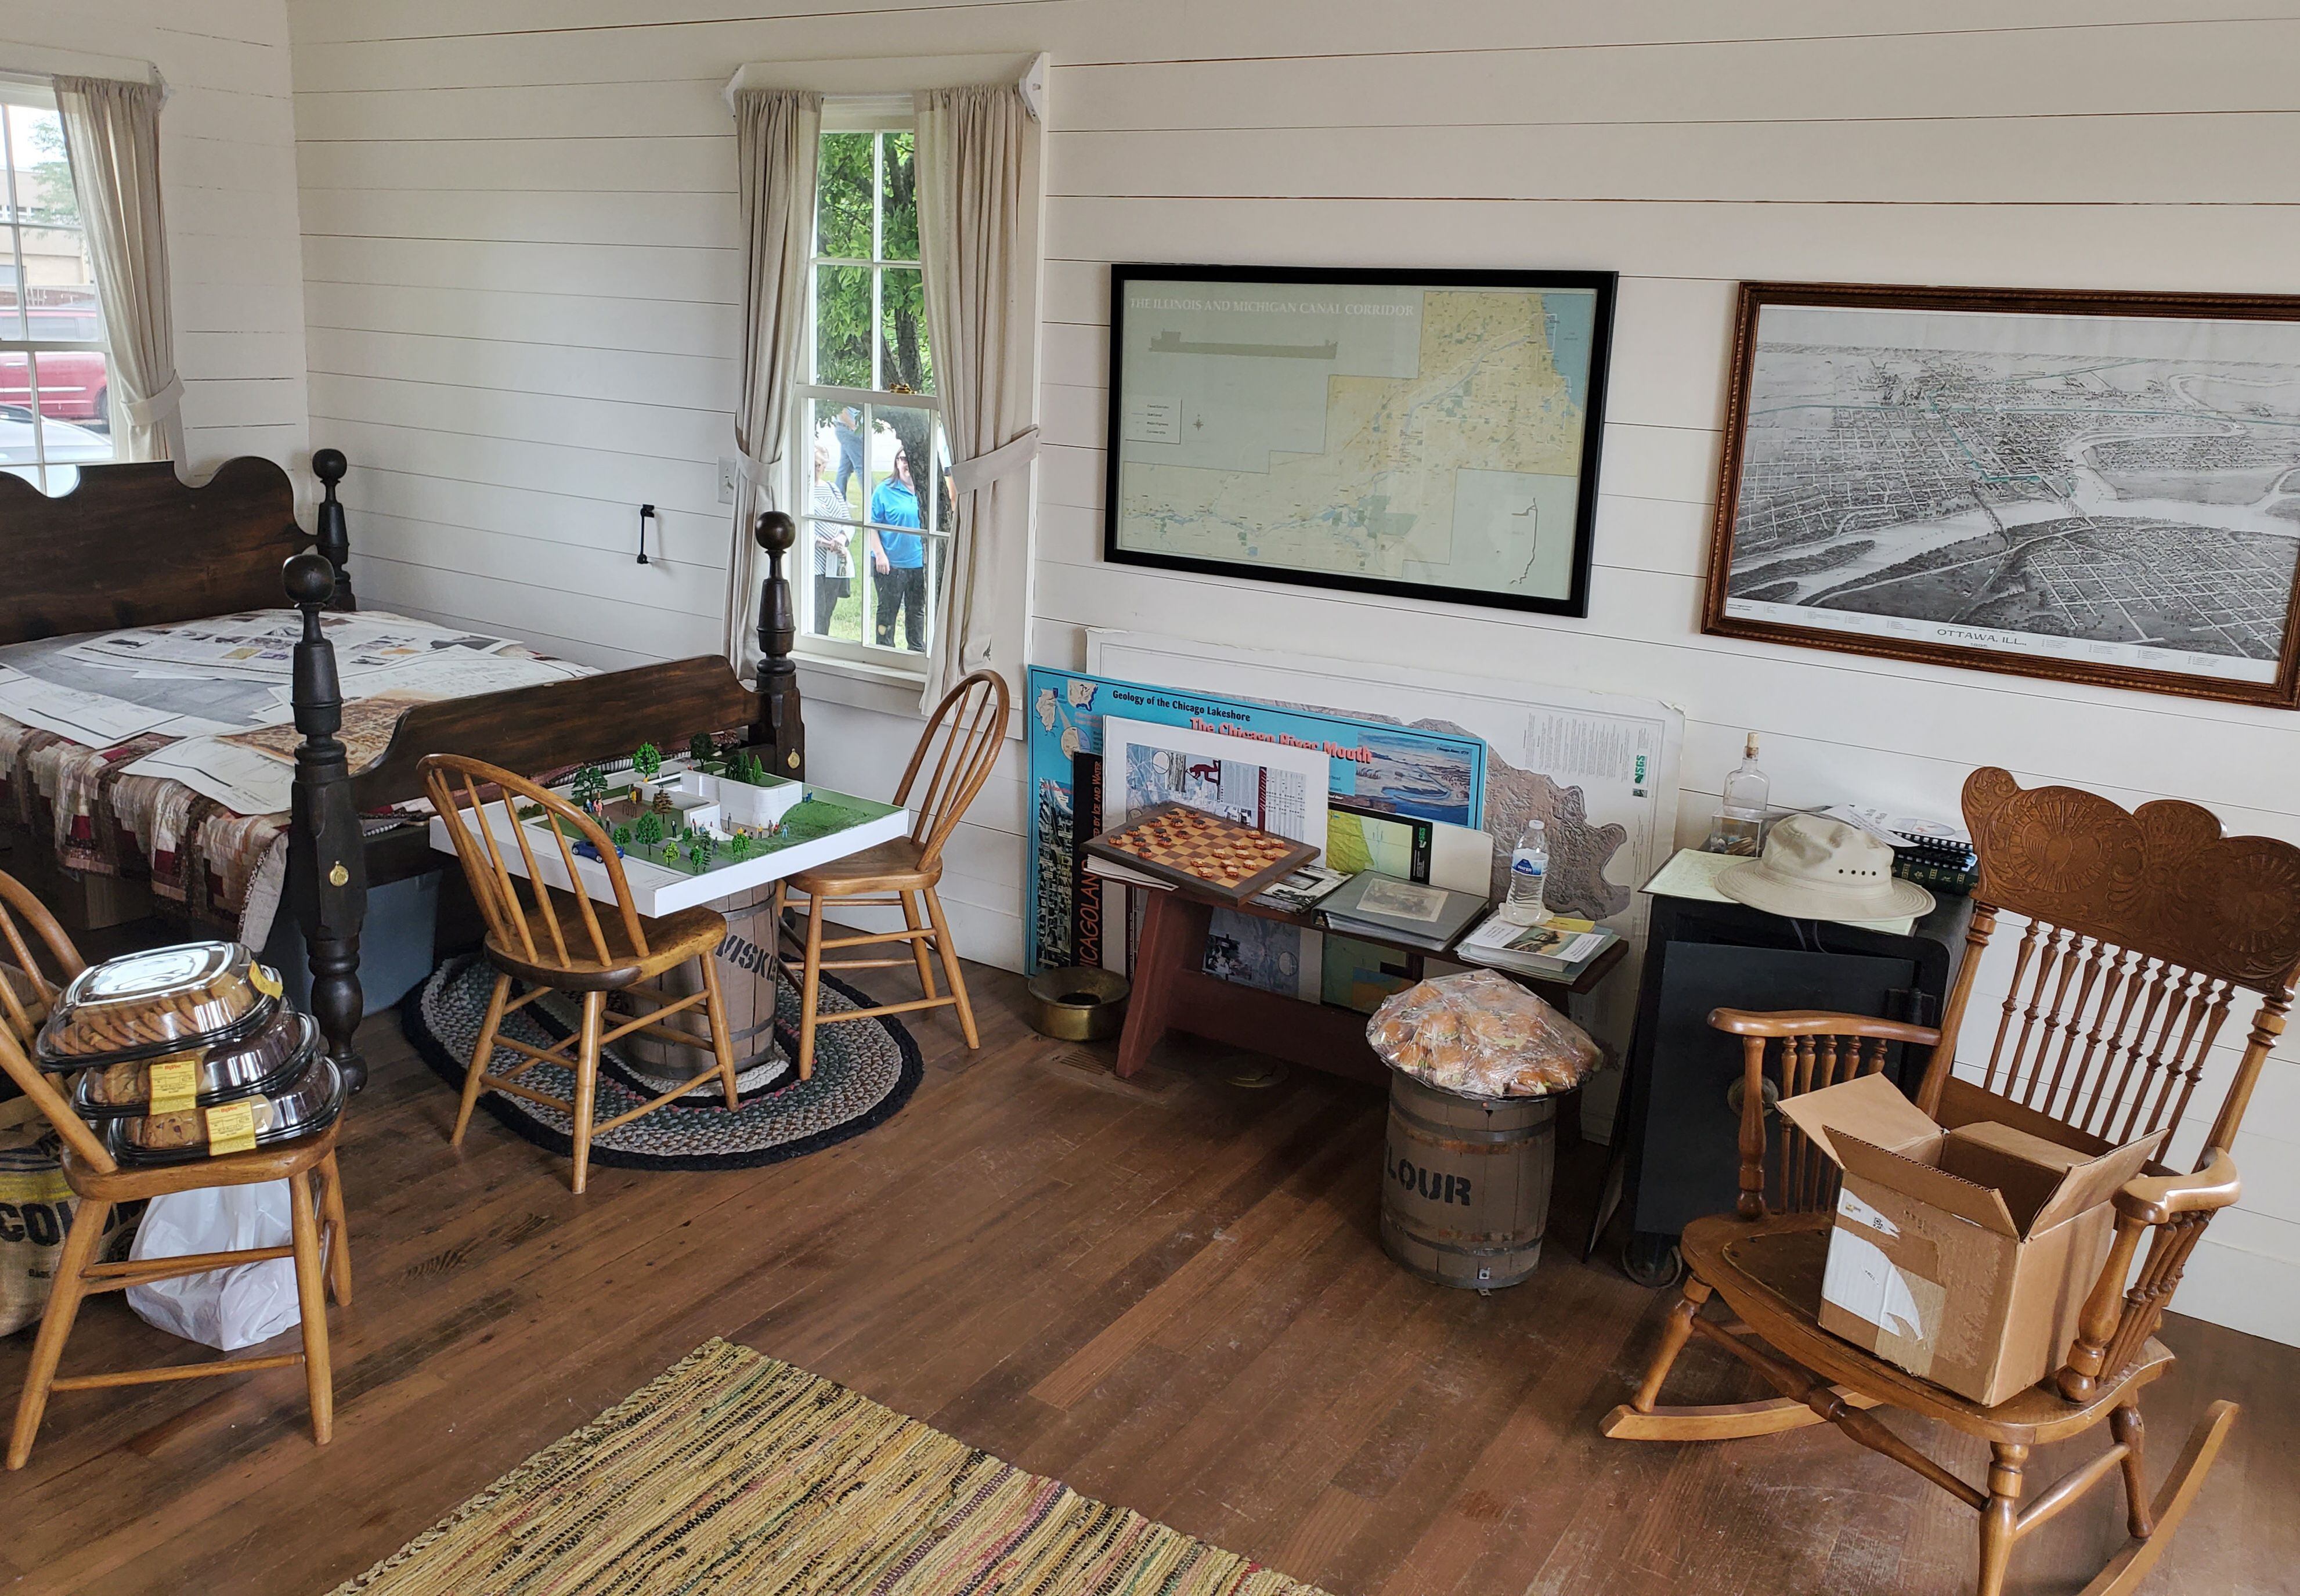 The inside of the Canal Toll House that displays many different historical items related to the canal.